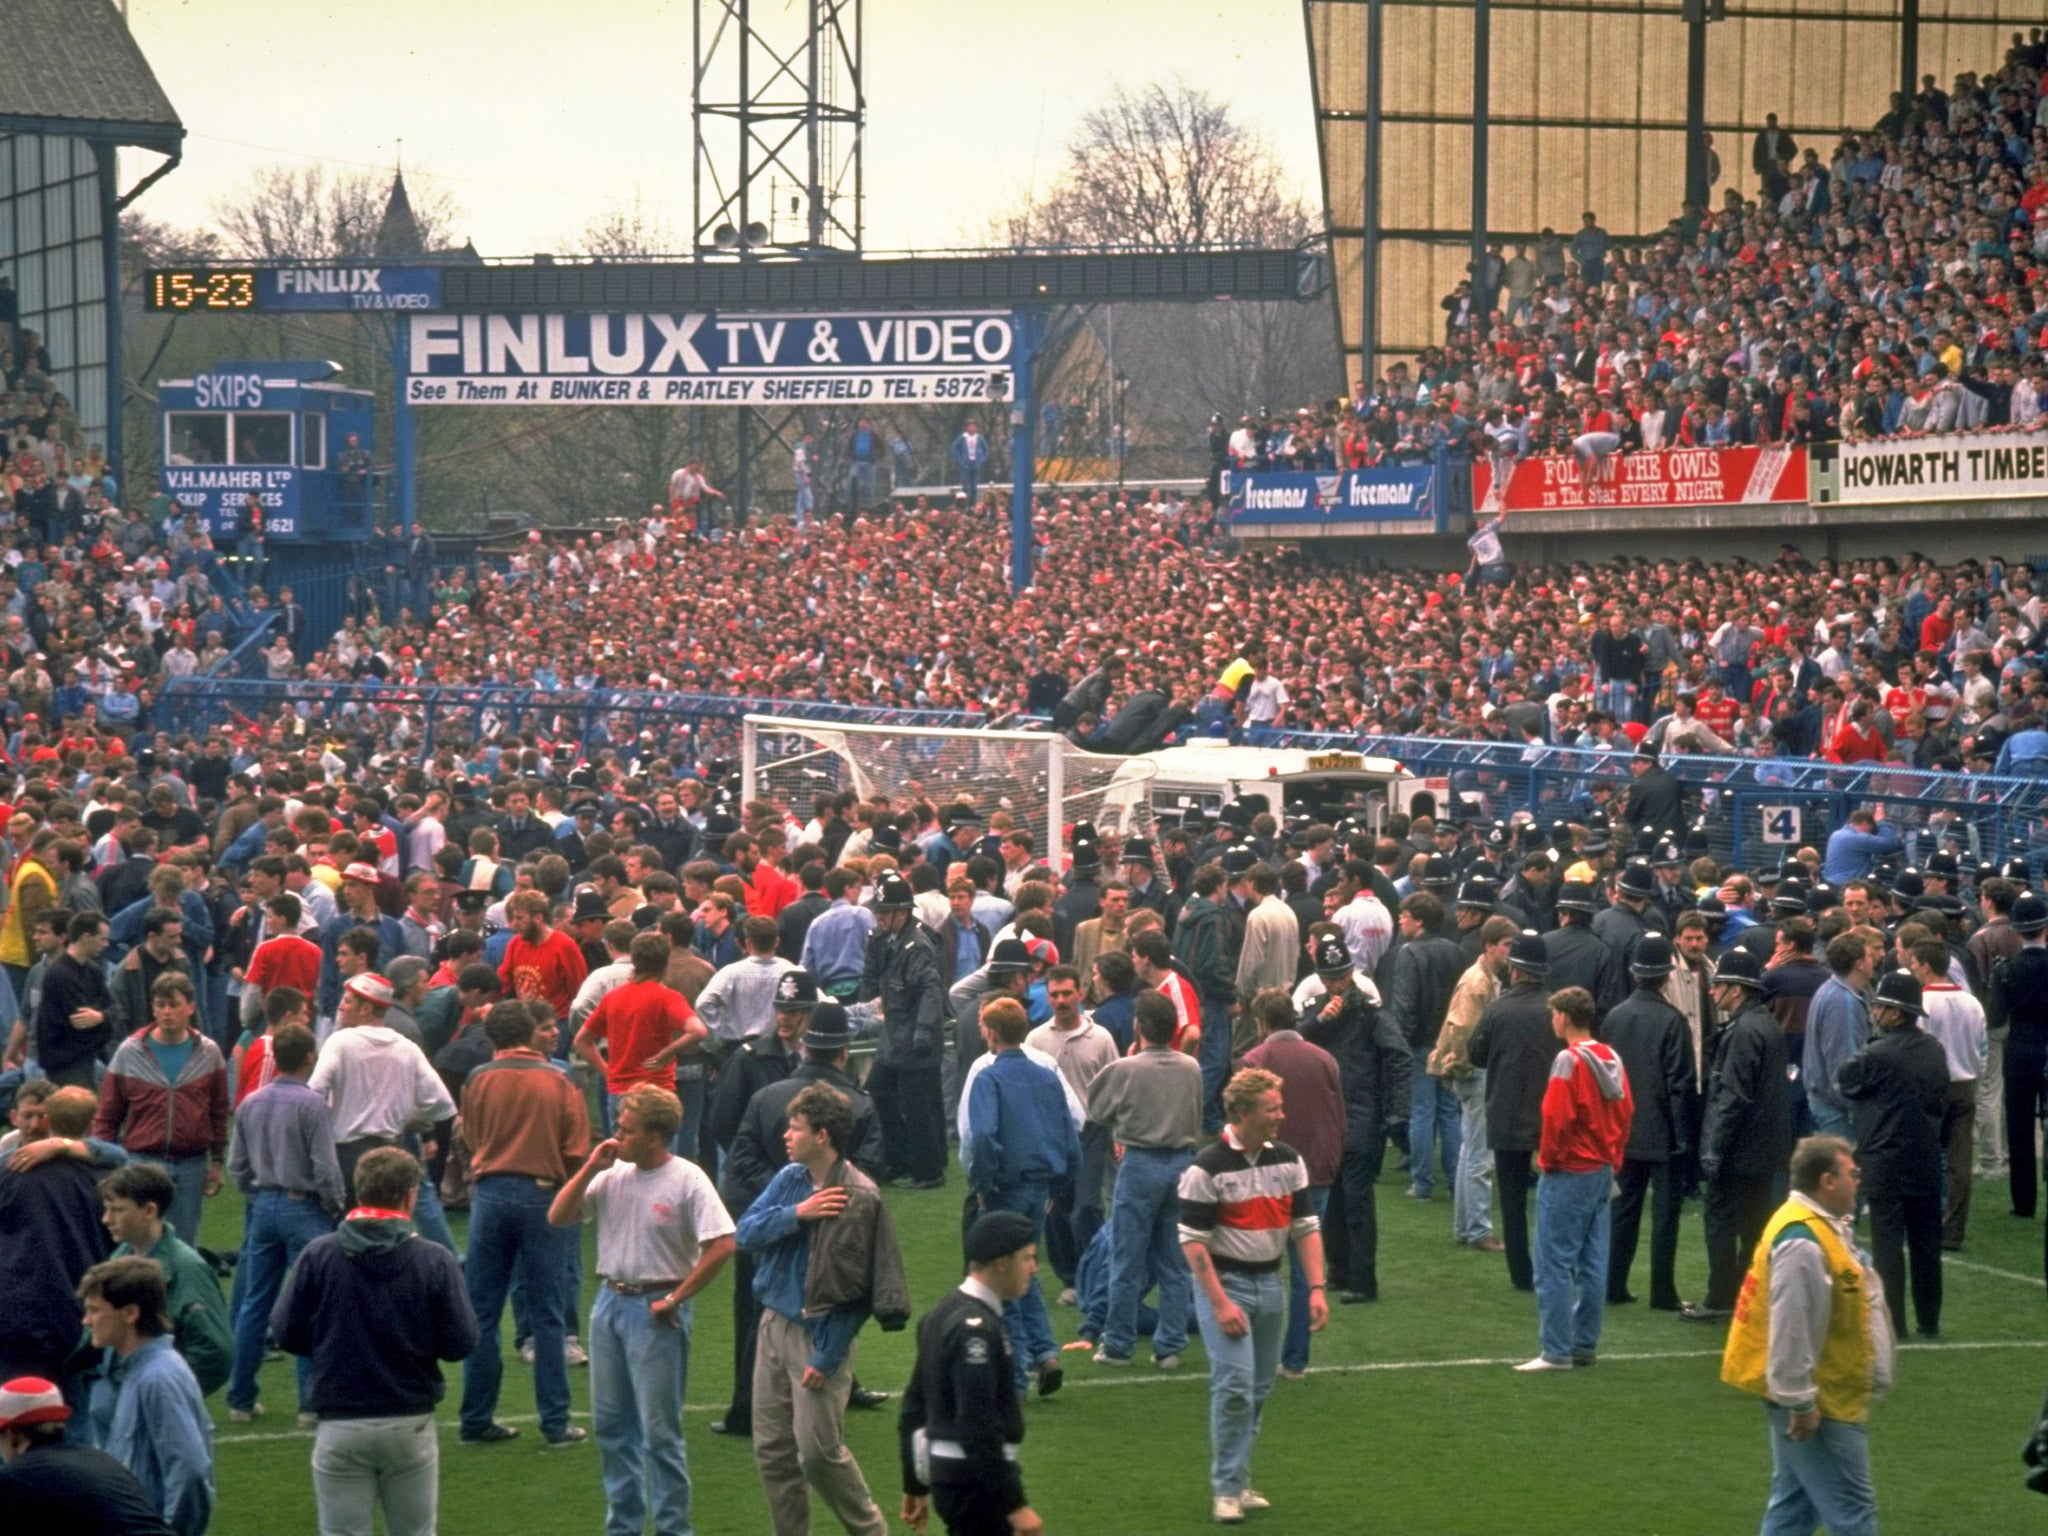 96 fans lost their lives during the 1989 disaster